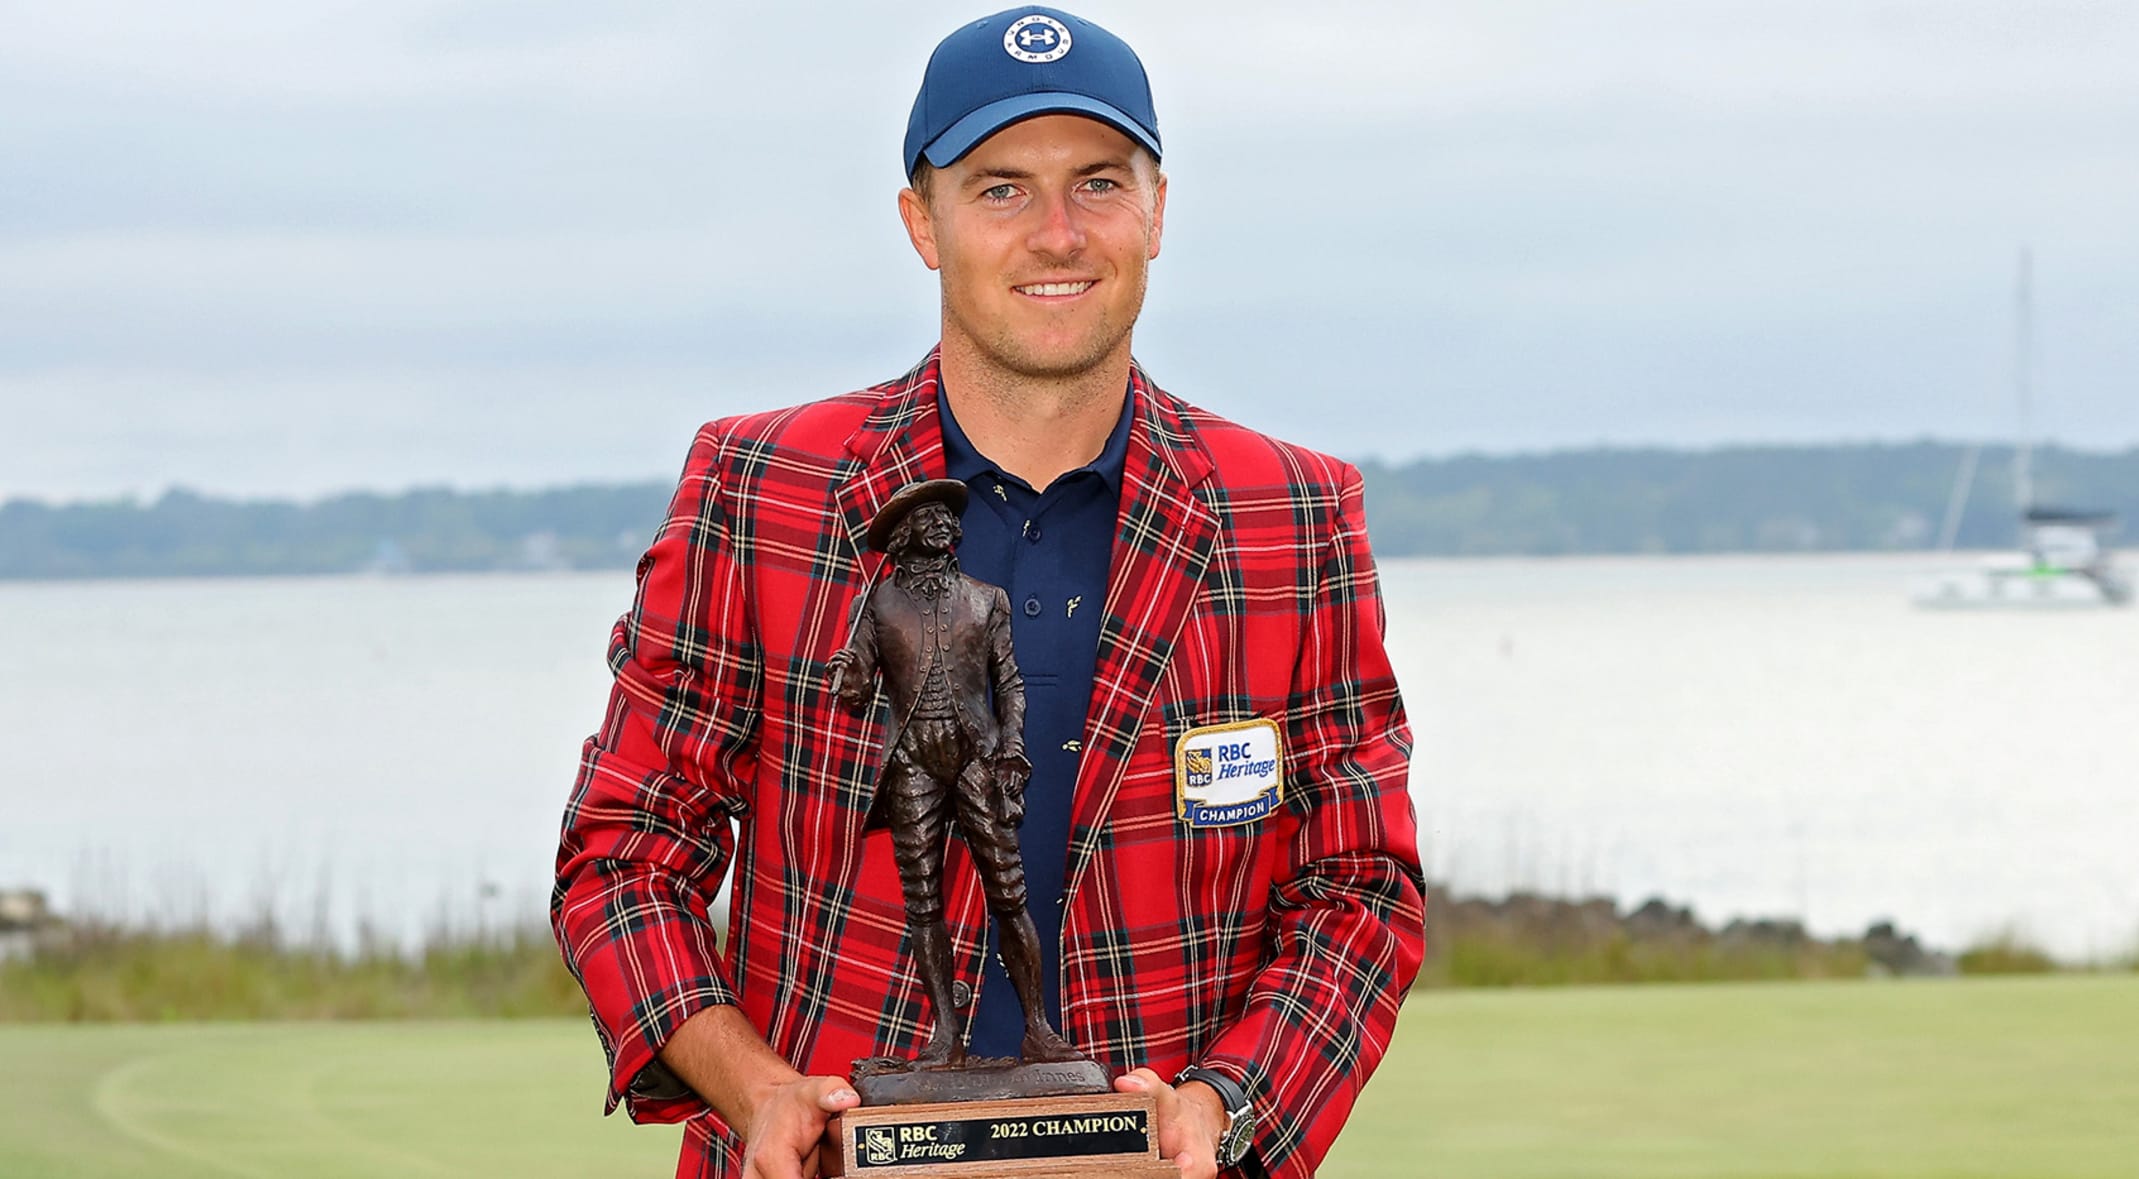 Jordan Spieth rides intangibles to RBC Heritage comeback victory